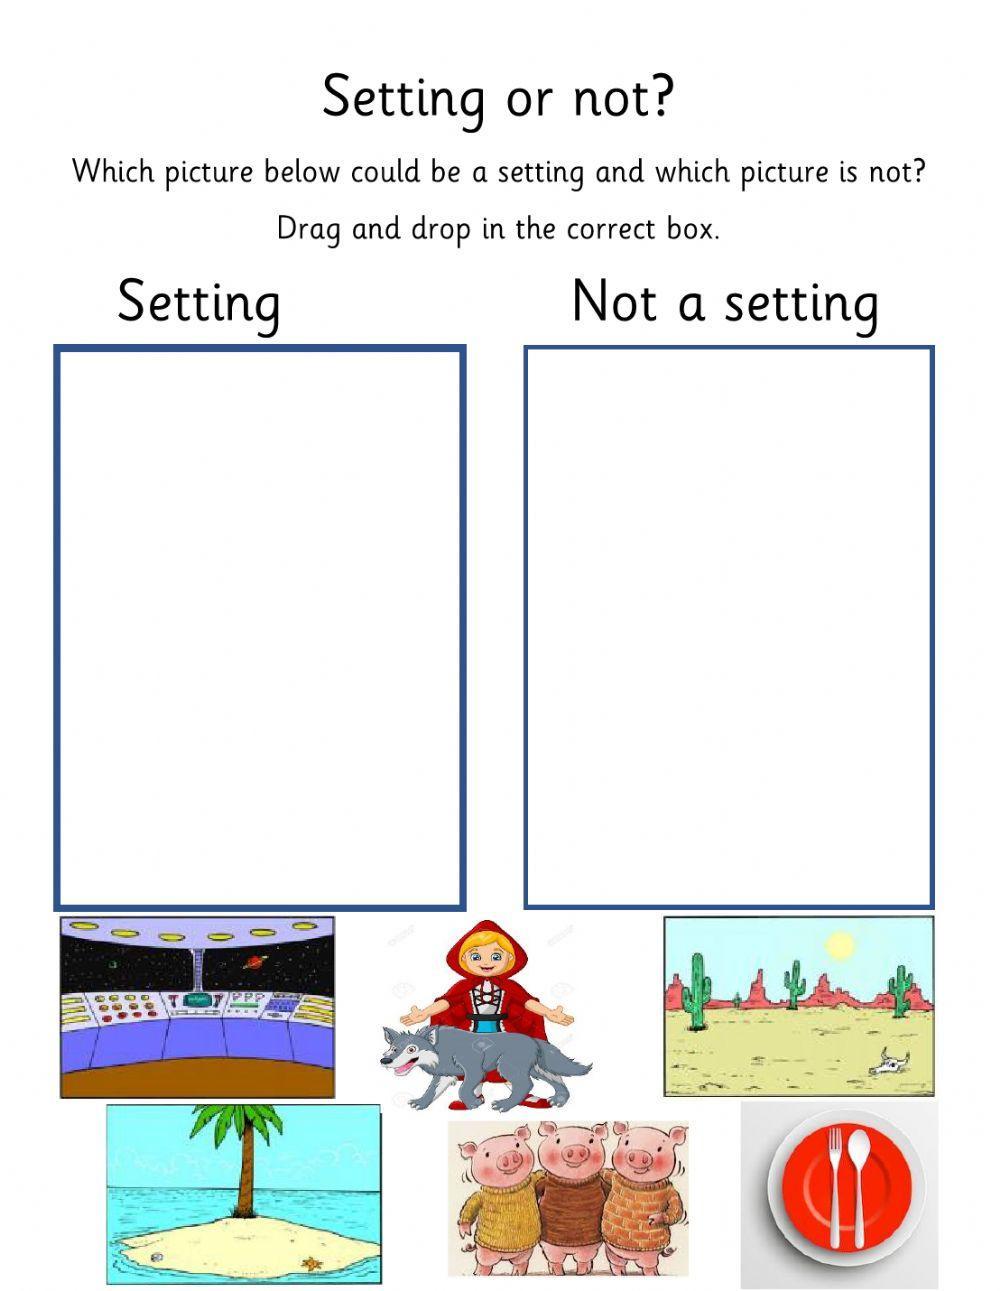 Setting or not?